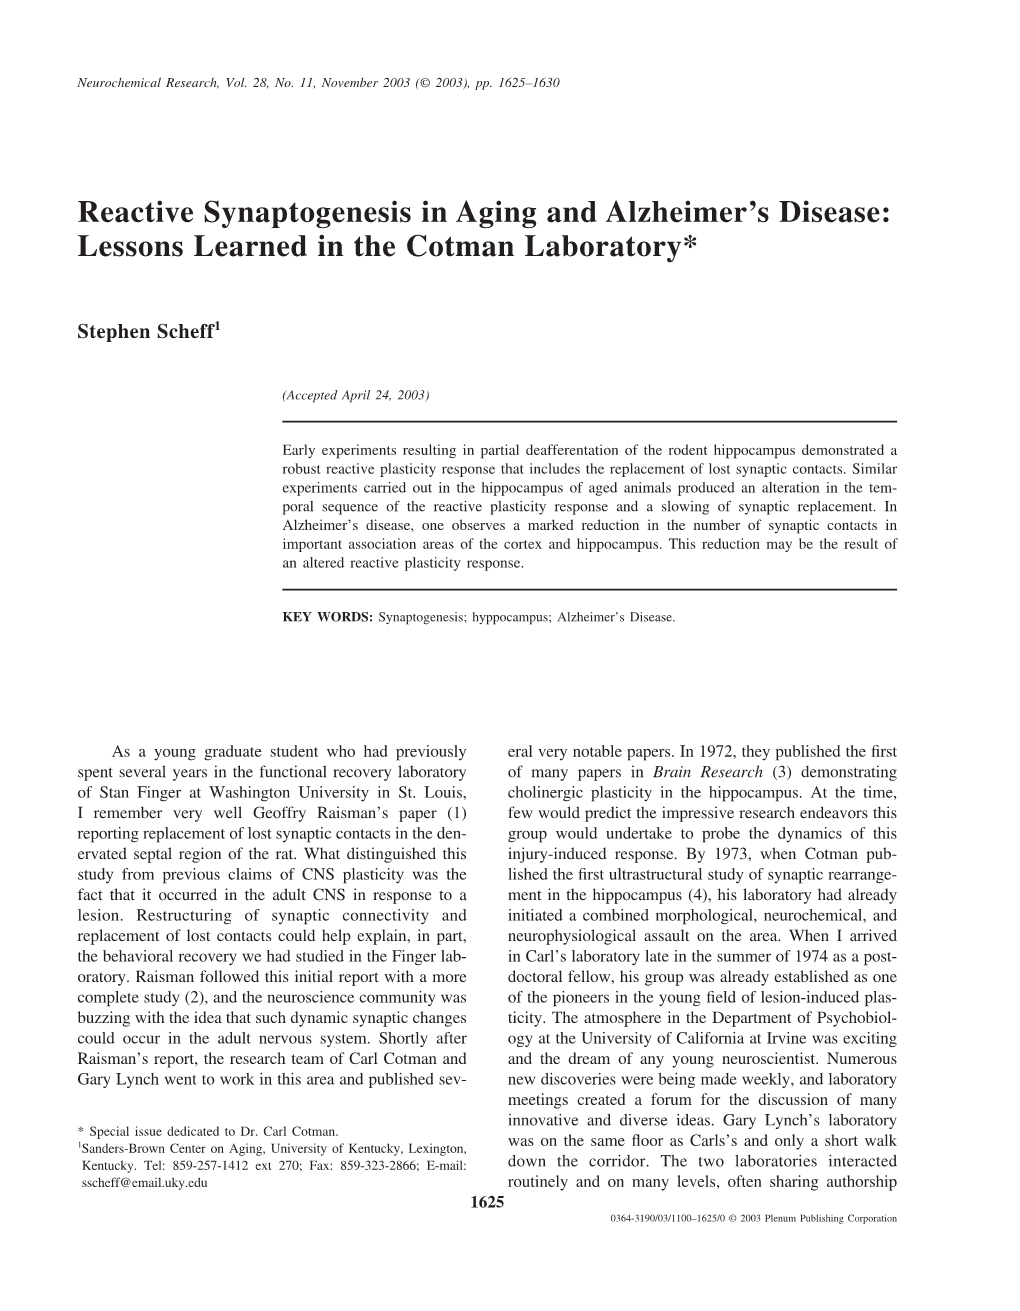 Reactive Synaptogenesis in Aging and Alzheimer's Disease